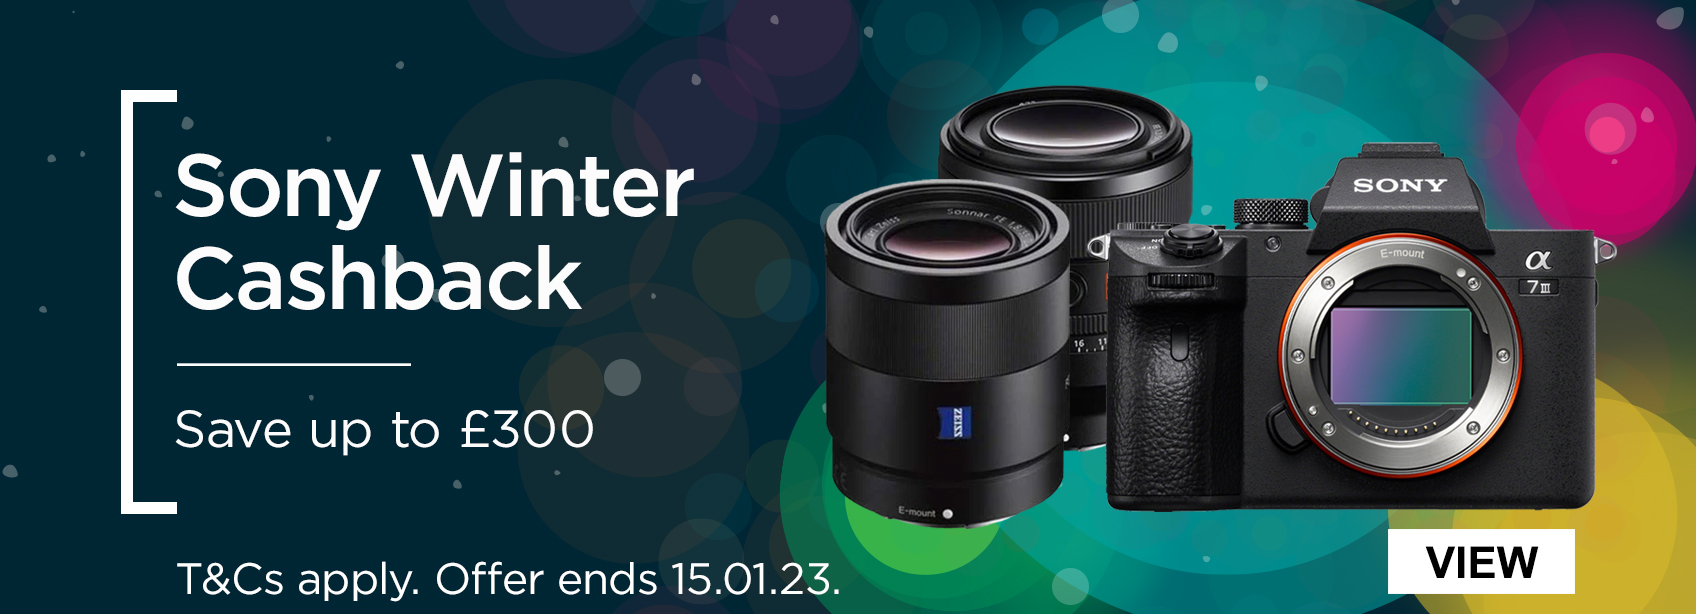 Sony Winter Cashback - Save up to £300. T&Cs apply. Ends 15.01.23.